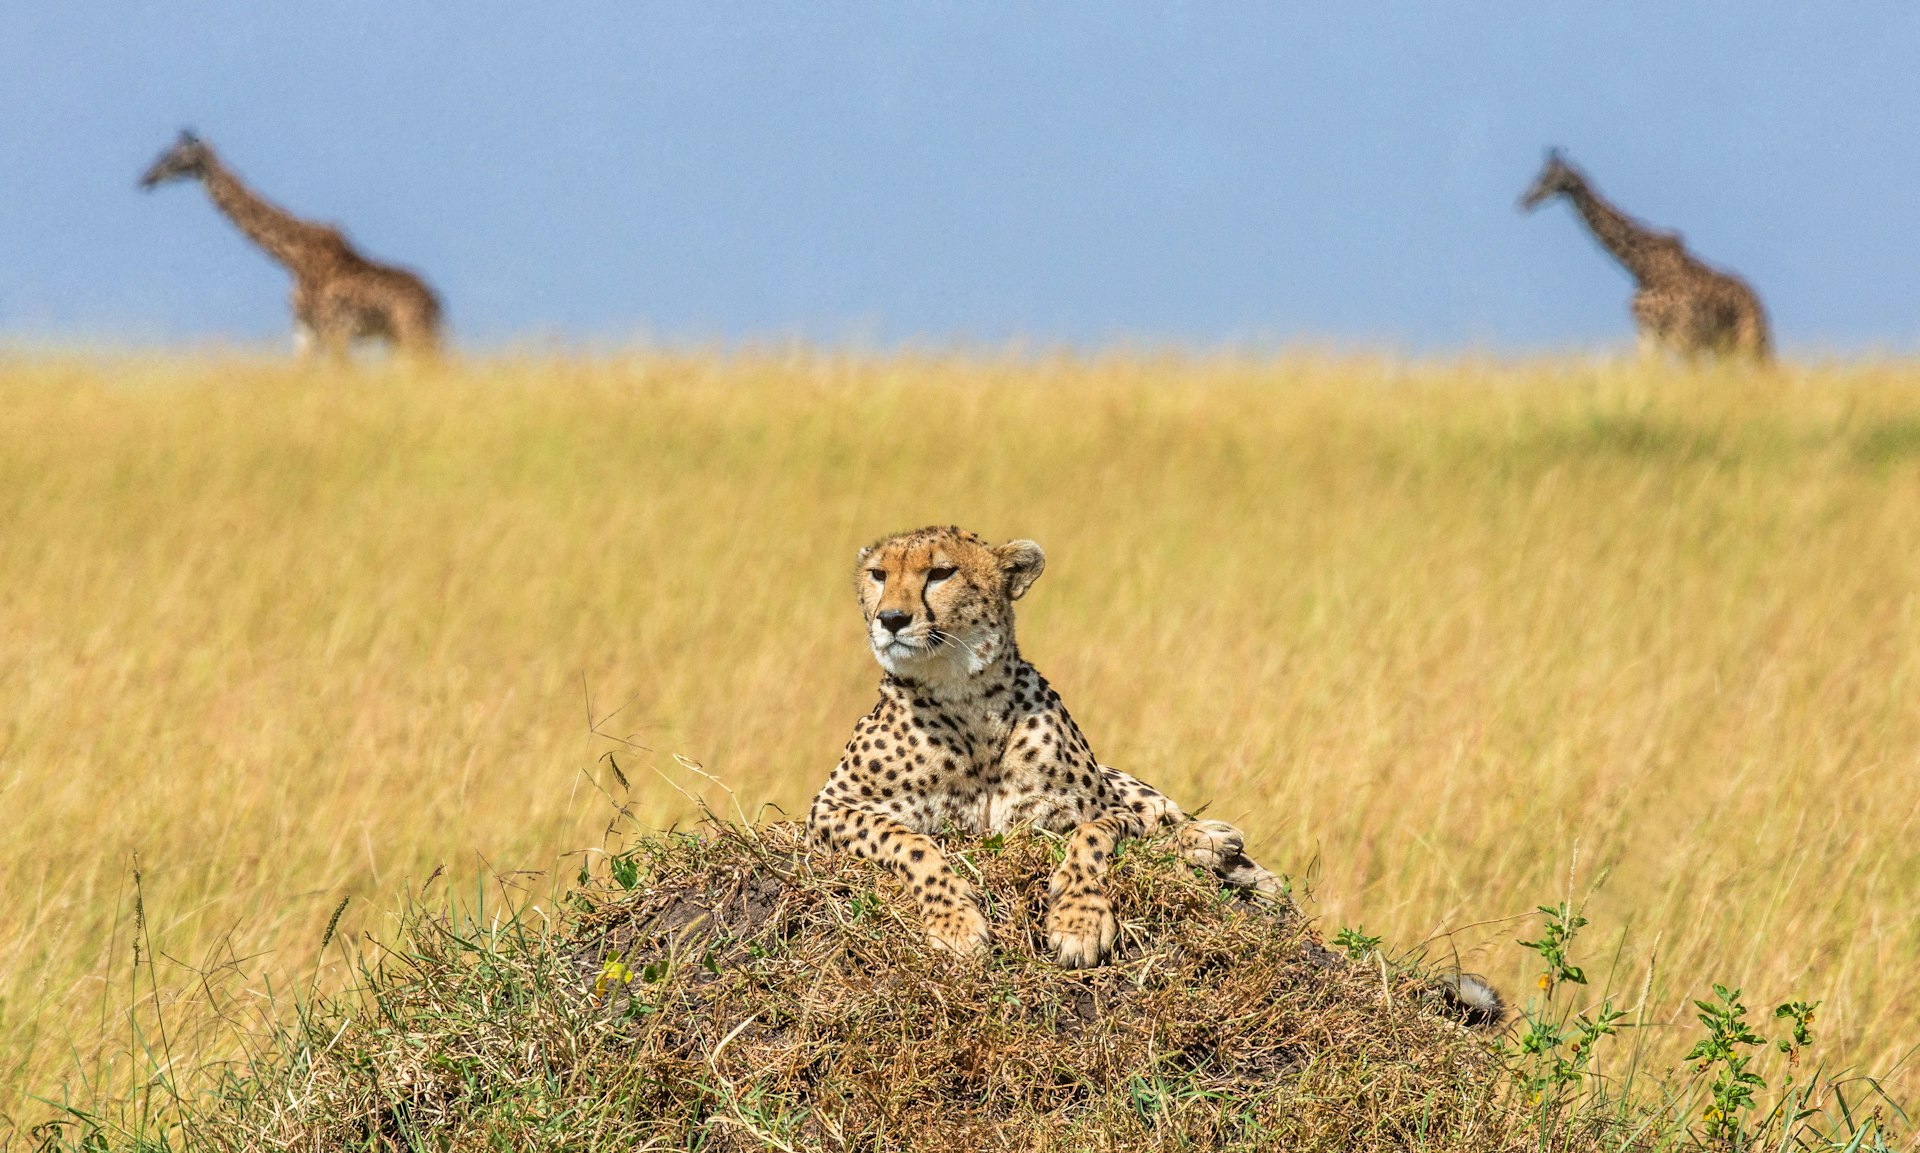 Cheetah on a small hill in the savannah with two giraffes in the background